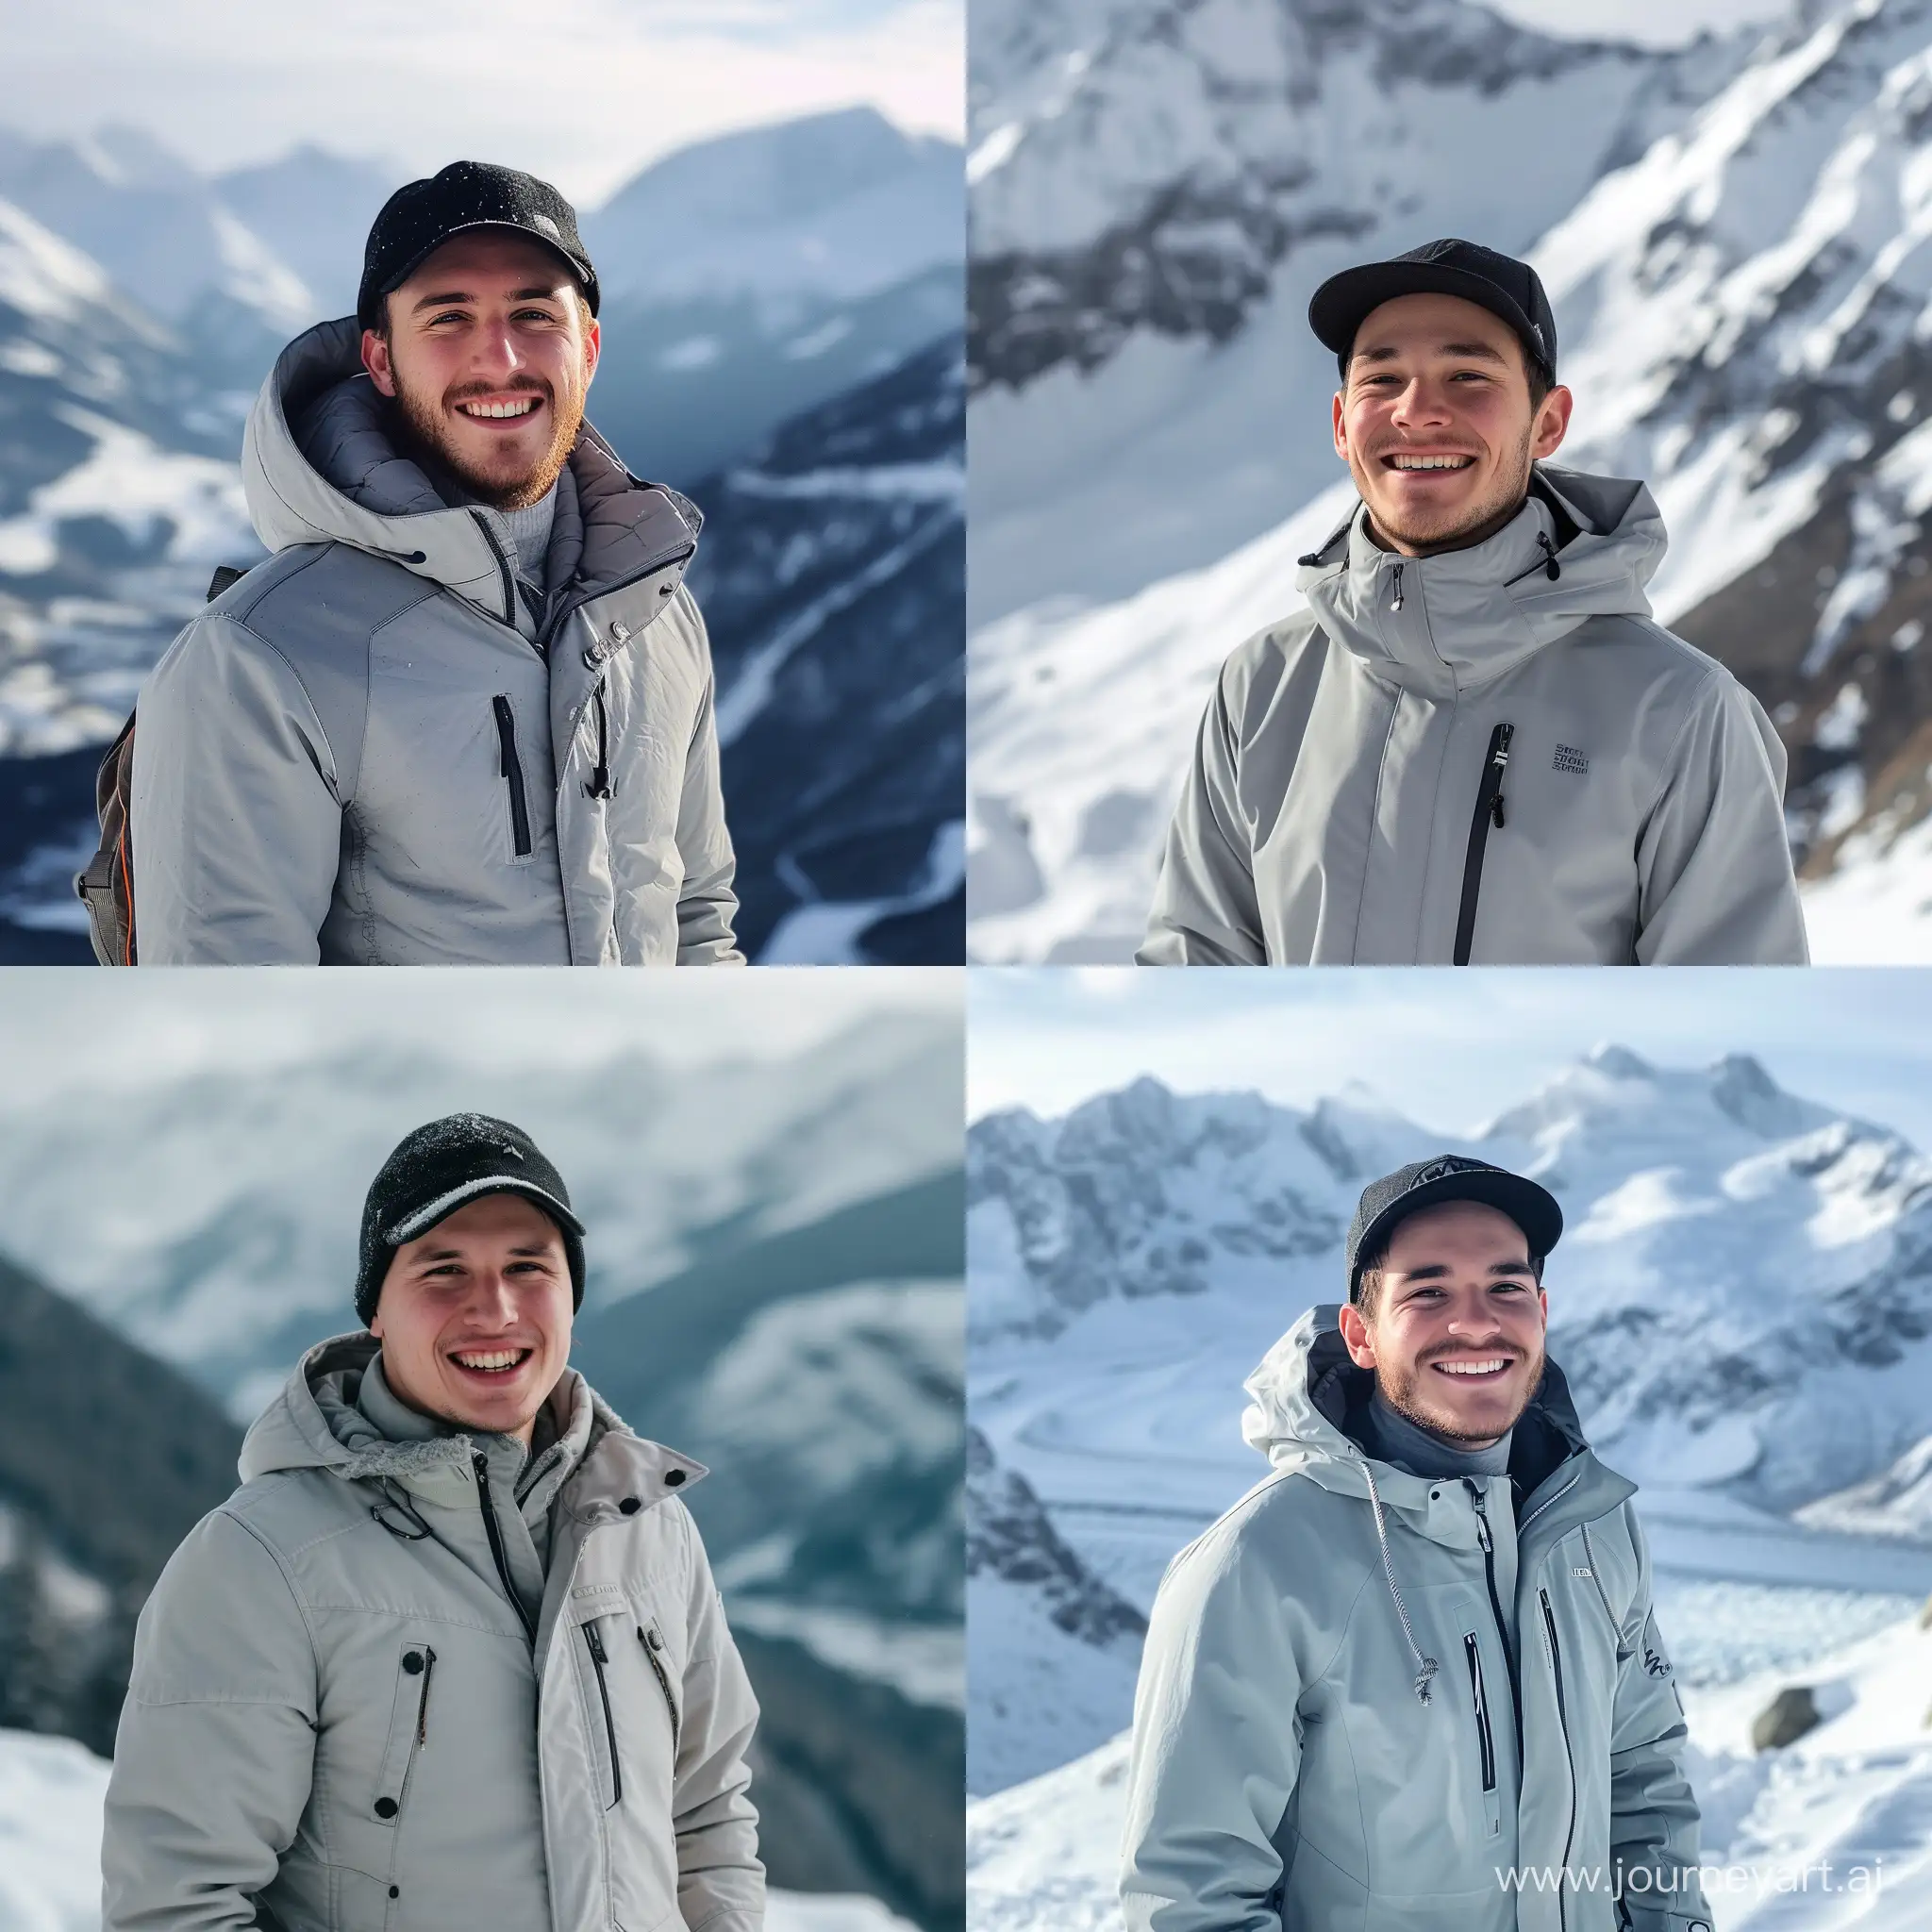 Smiling-Oliver-Stark-in-Stylish-Winter-Attire-against-Snowy-Mountain-Backdrop